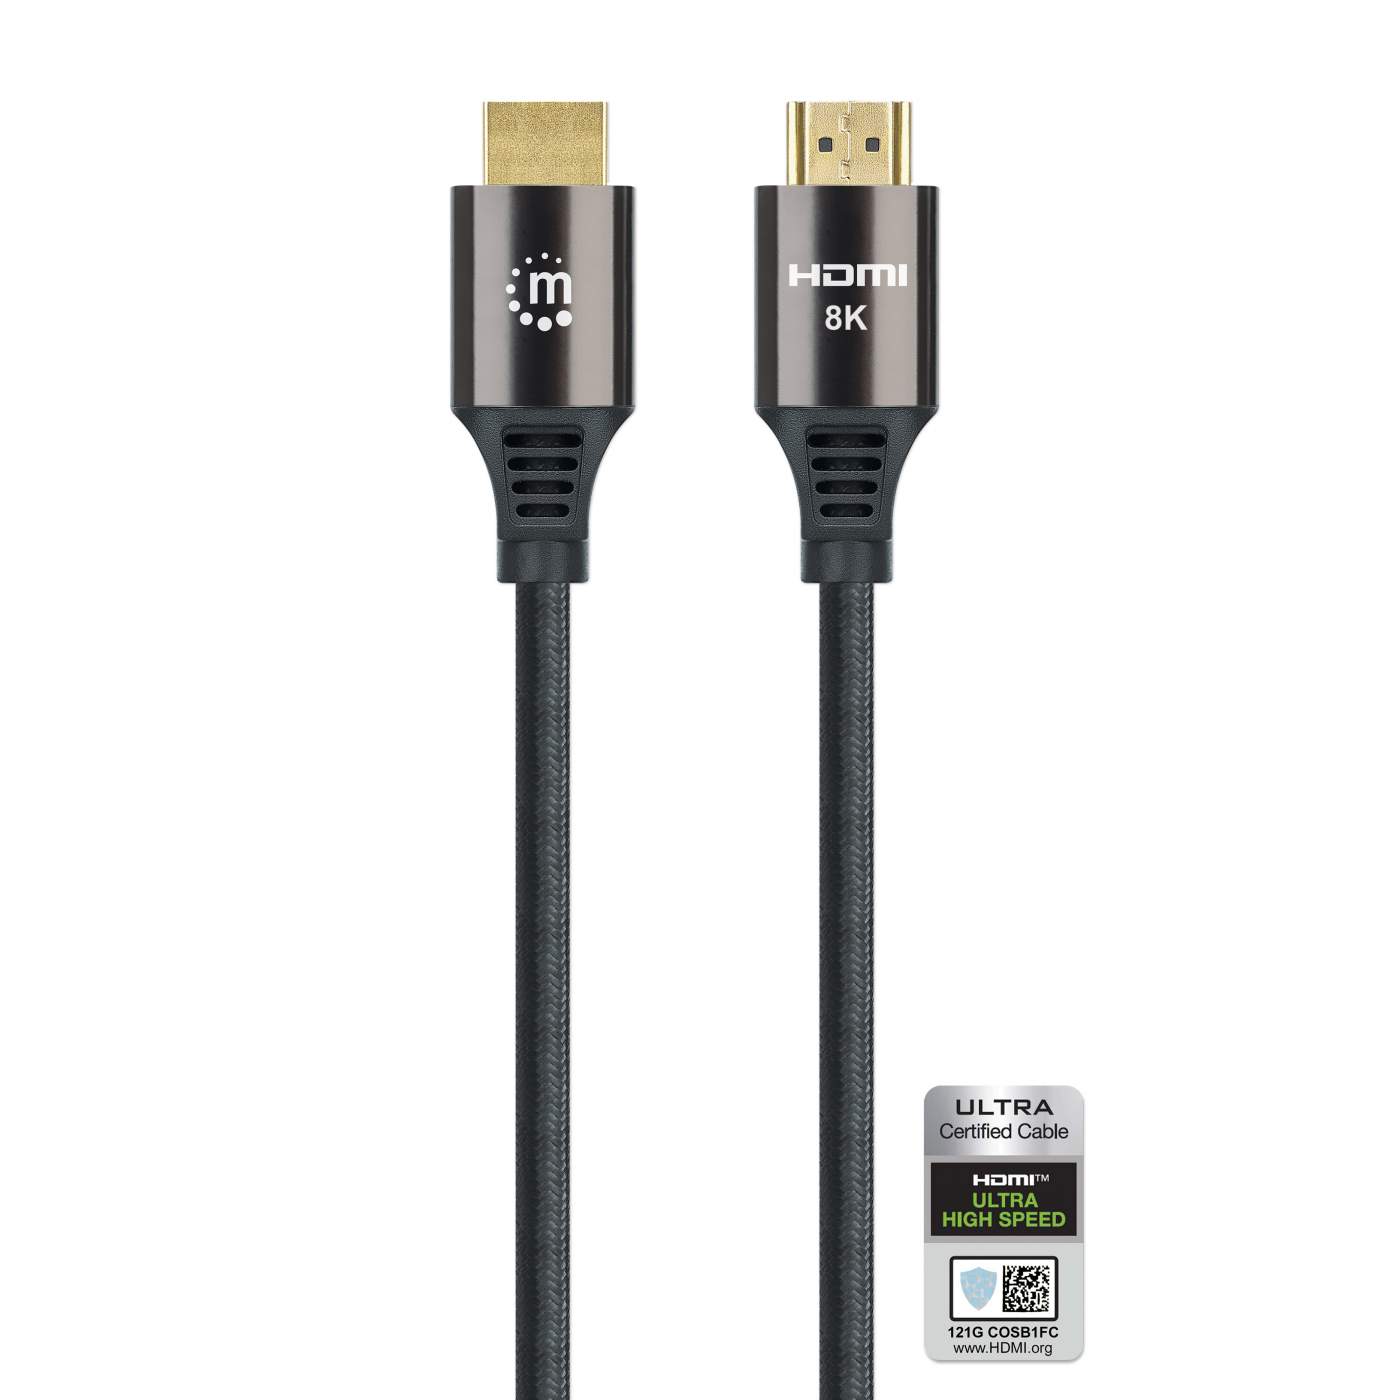 8K@60Hz Certified Ultra High Speed HDMI Cable with Ethernet Image 4